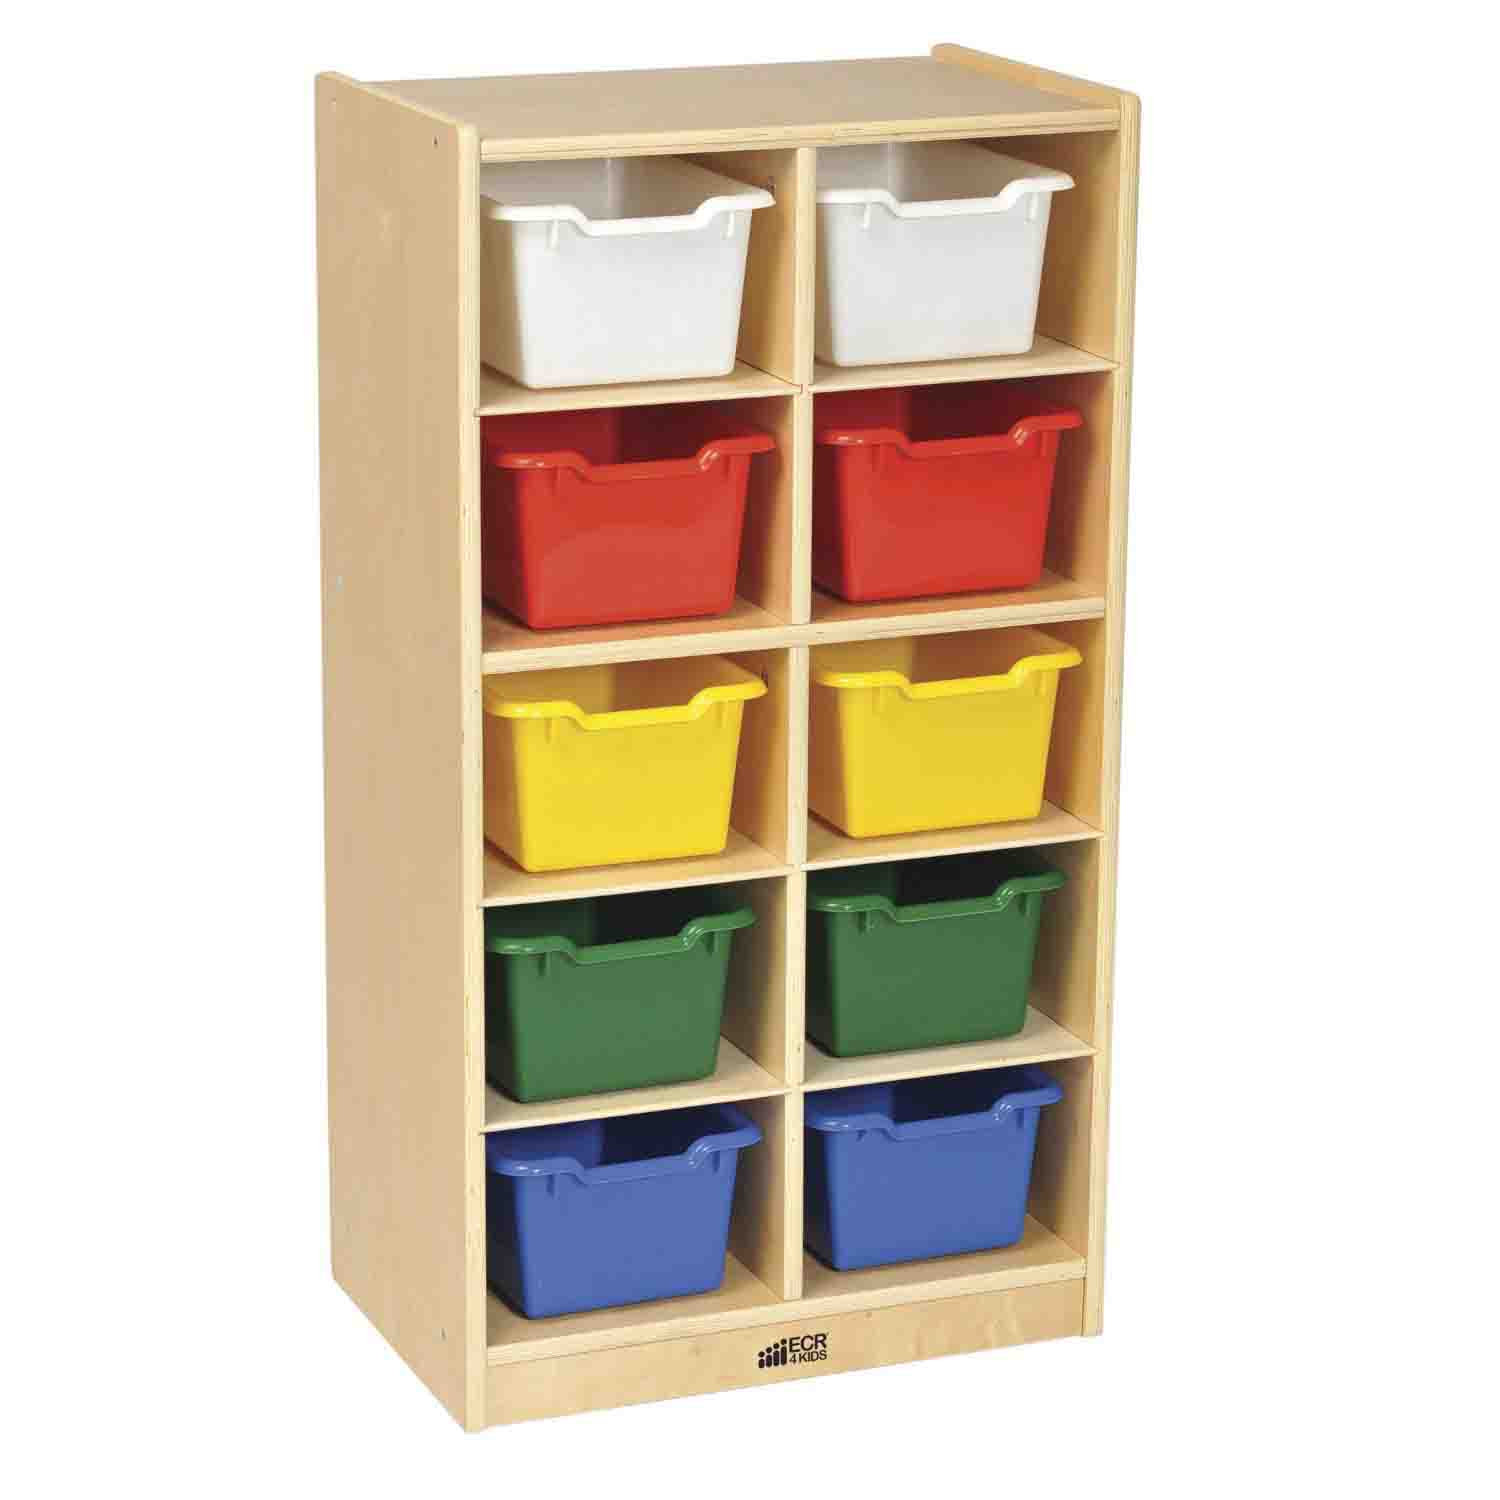 10 Tray Mobile Storage Cubbies w/ colored trays